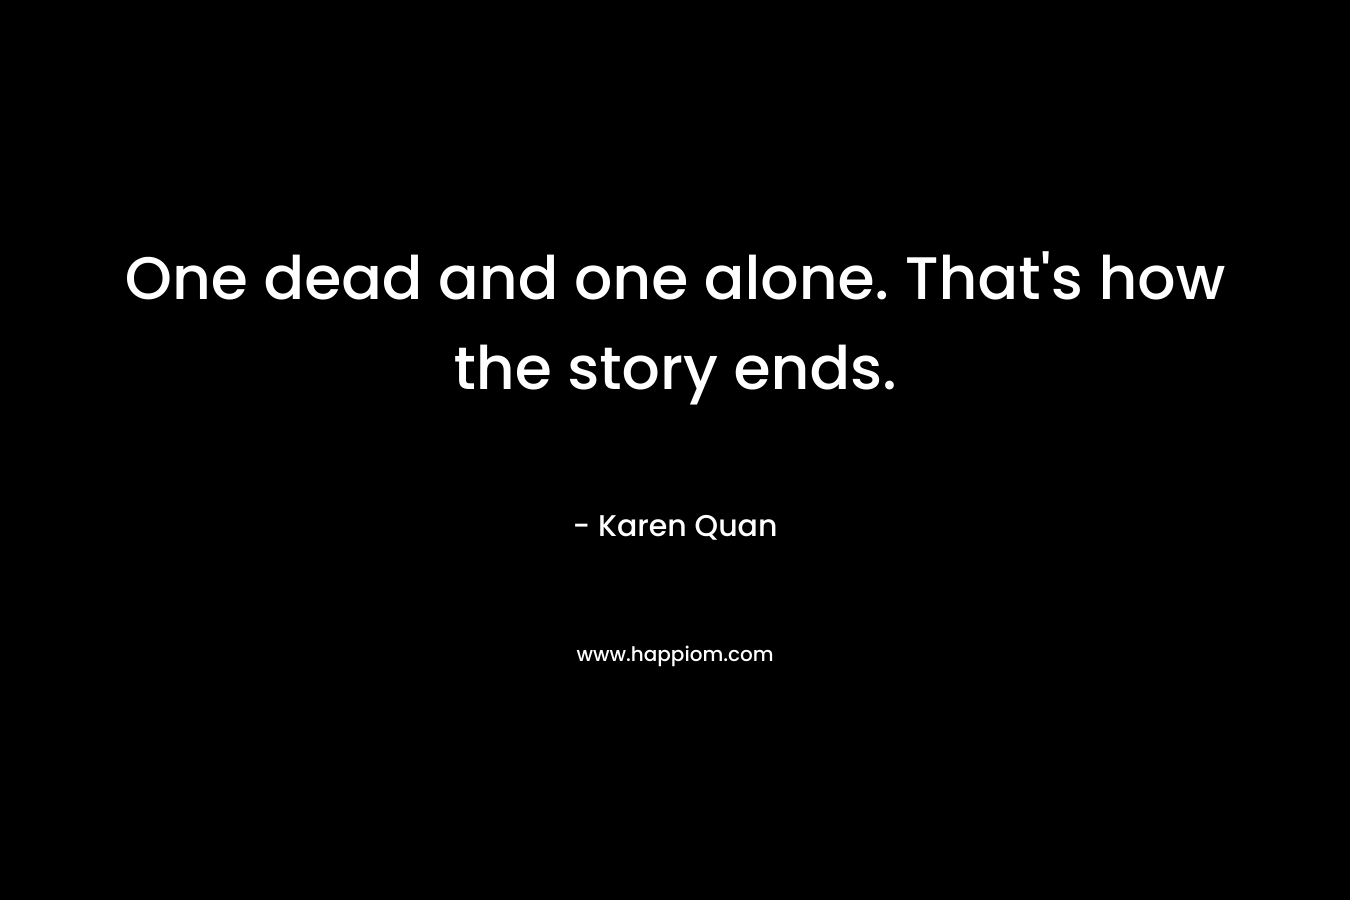 One dead and one alone. That's how the story ends.